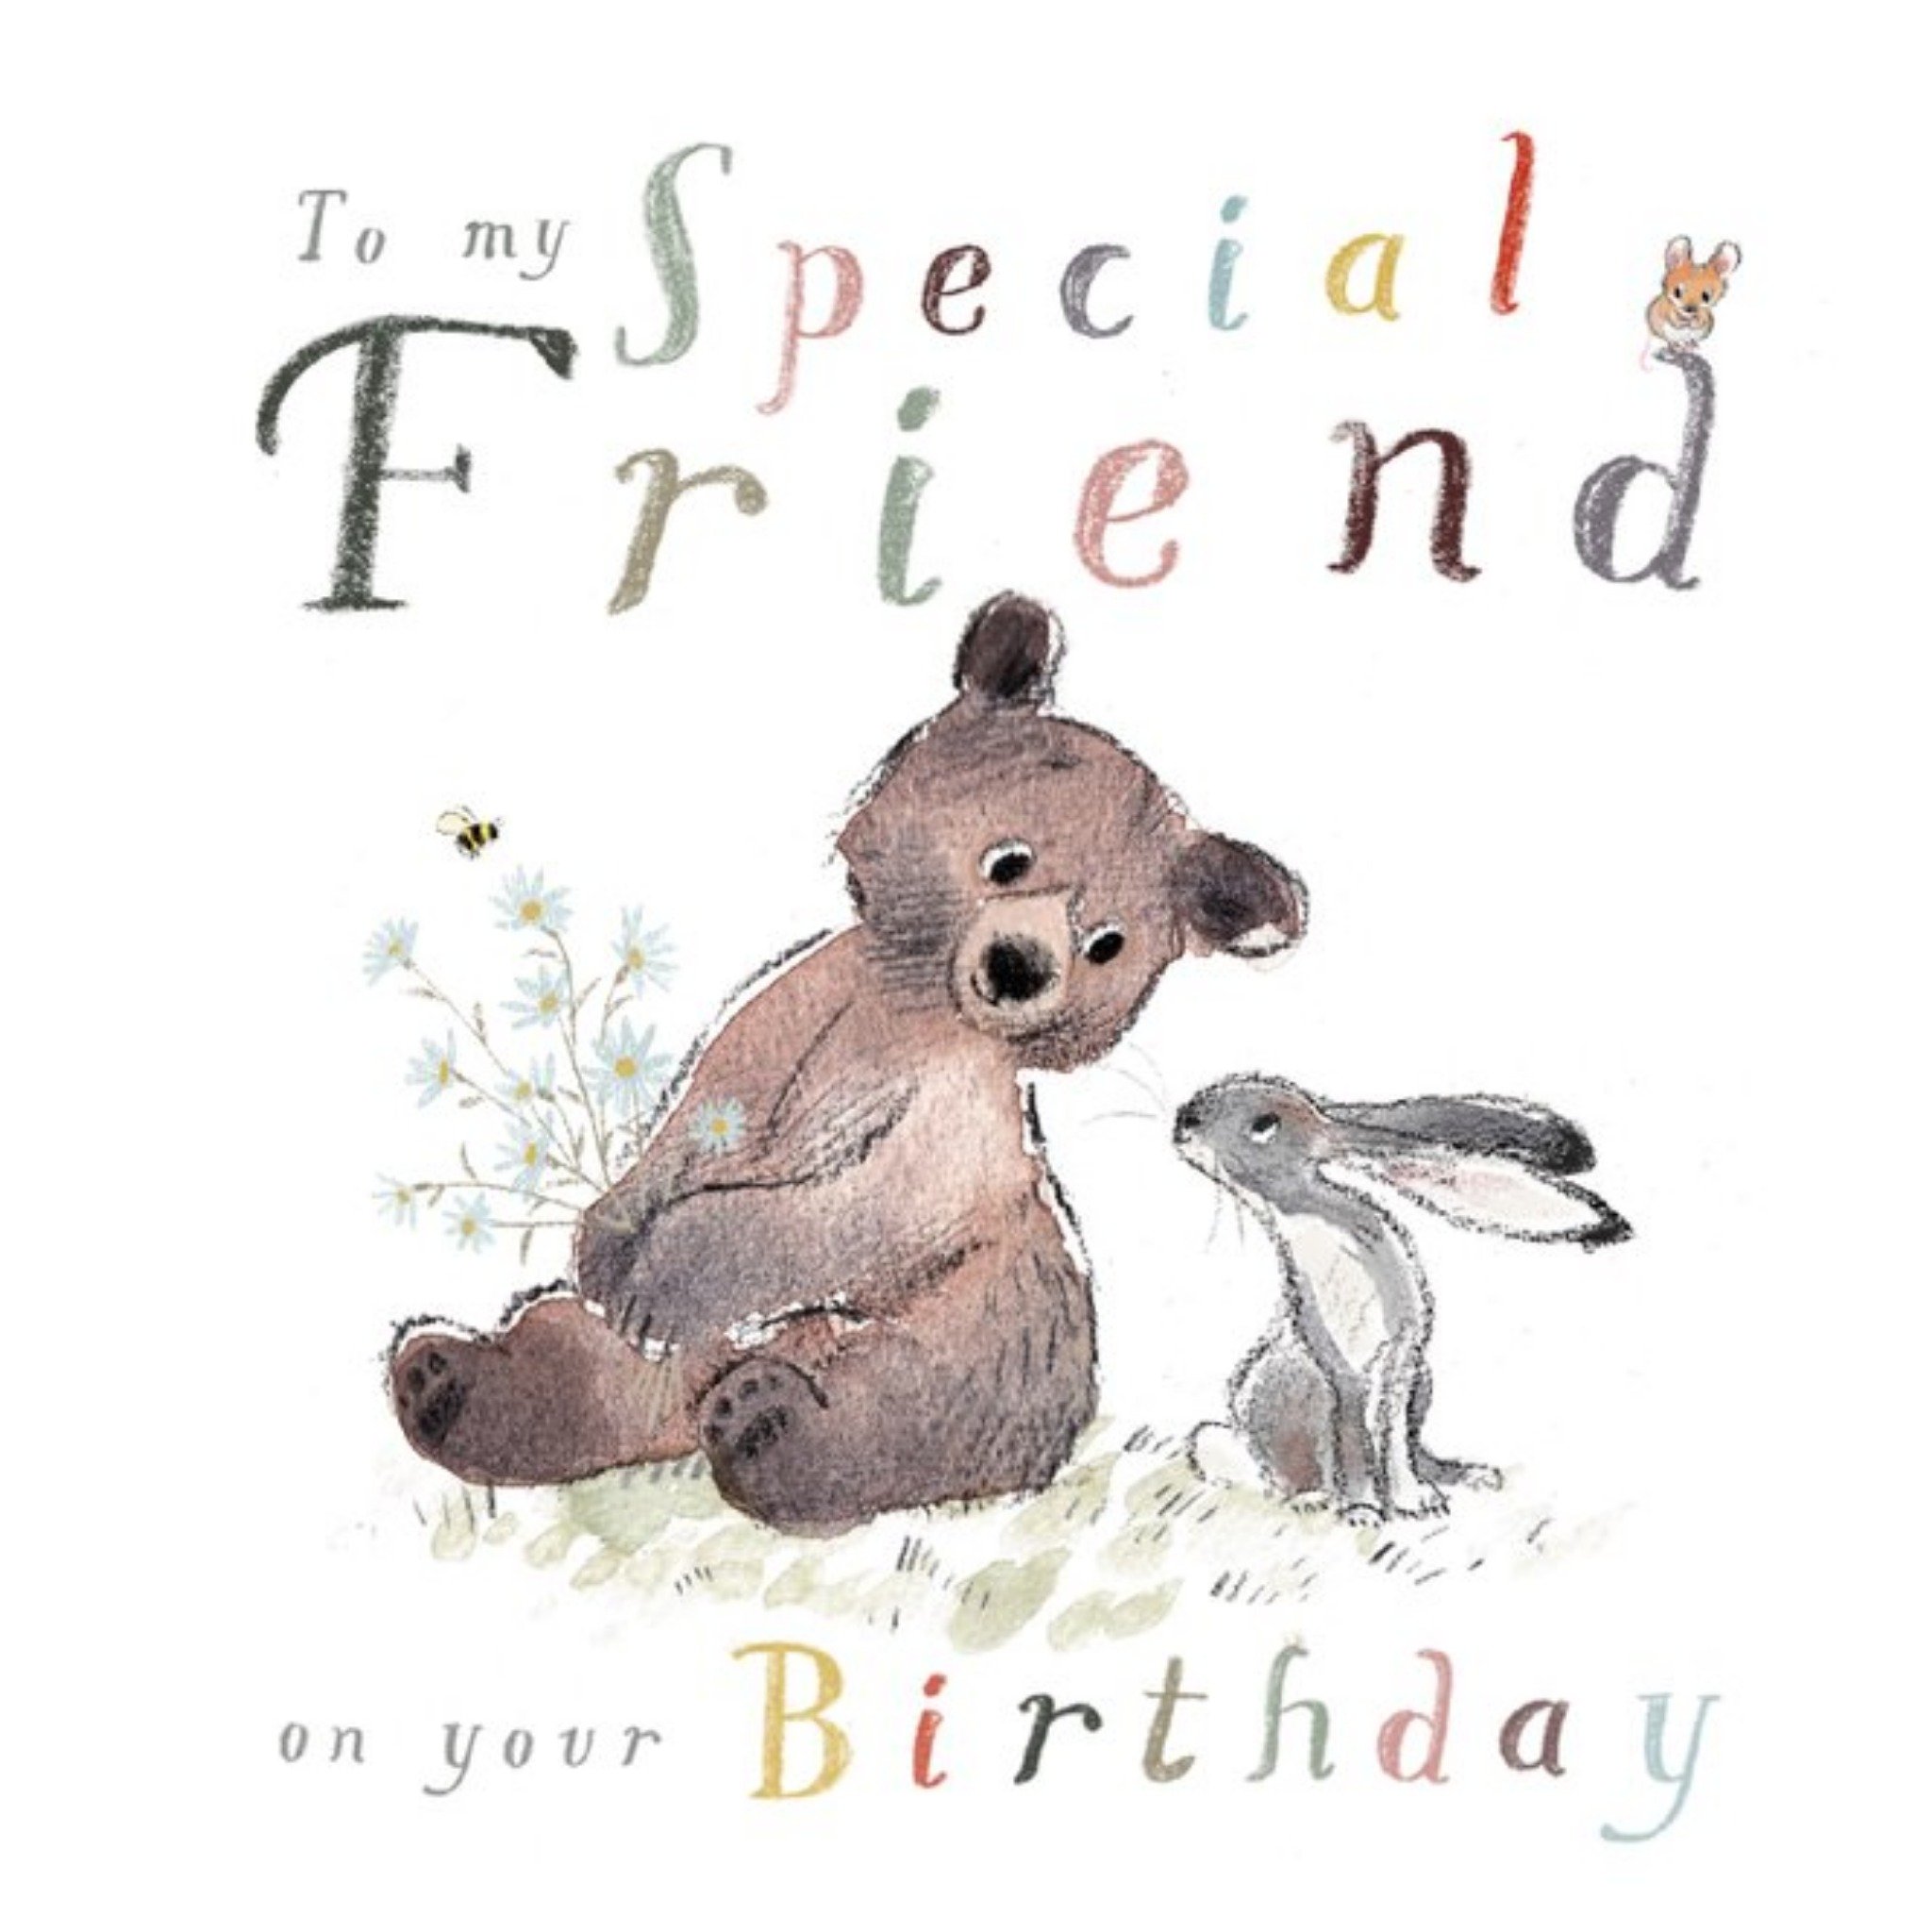 Moonpig Illustration Of A Cute Bear And A Hare To My Special Friend Birthday Card, Large